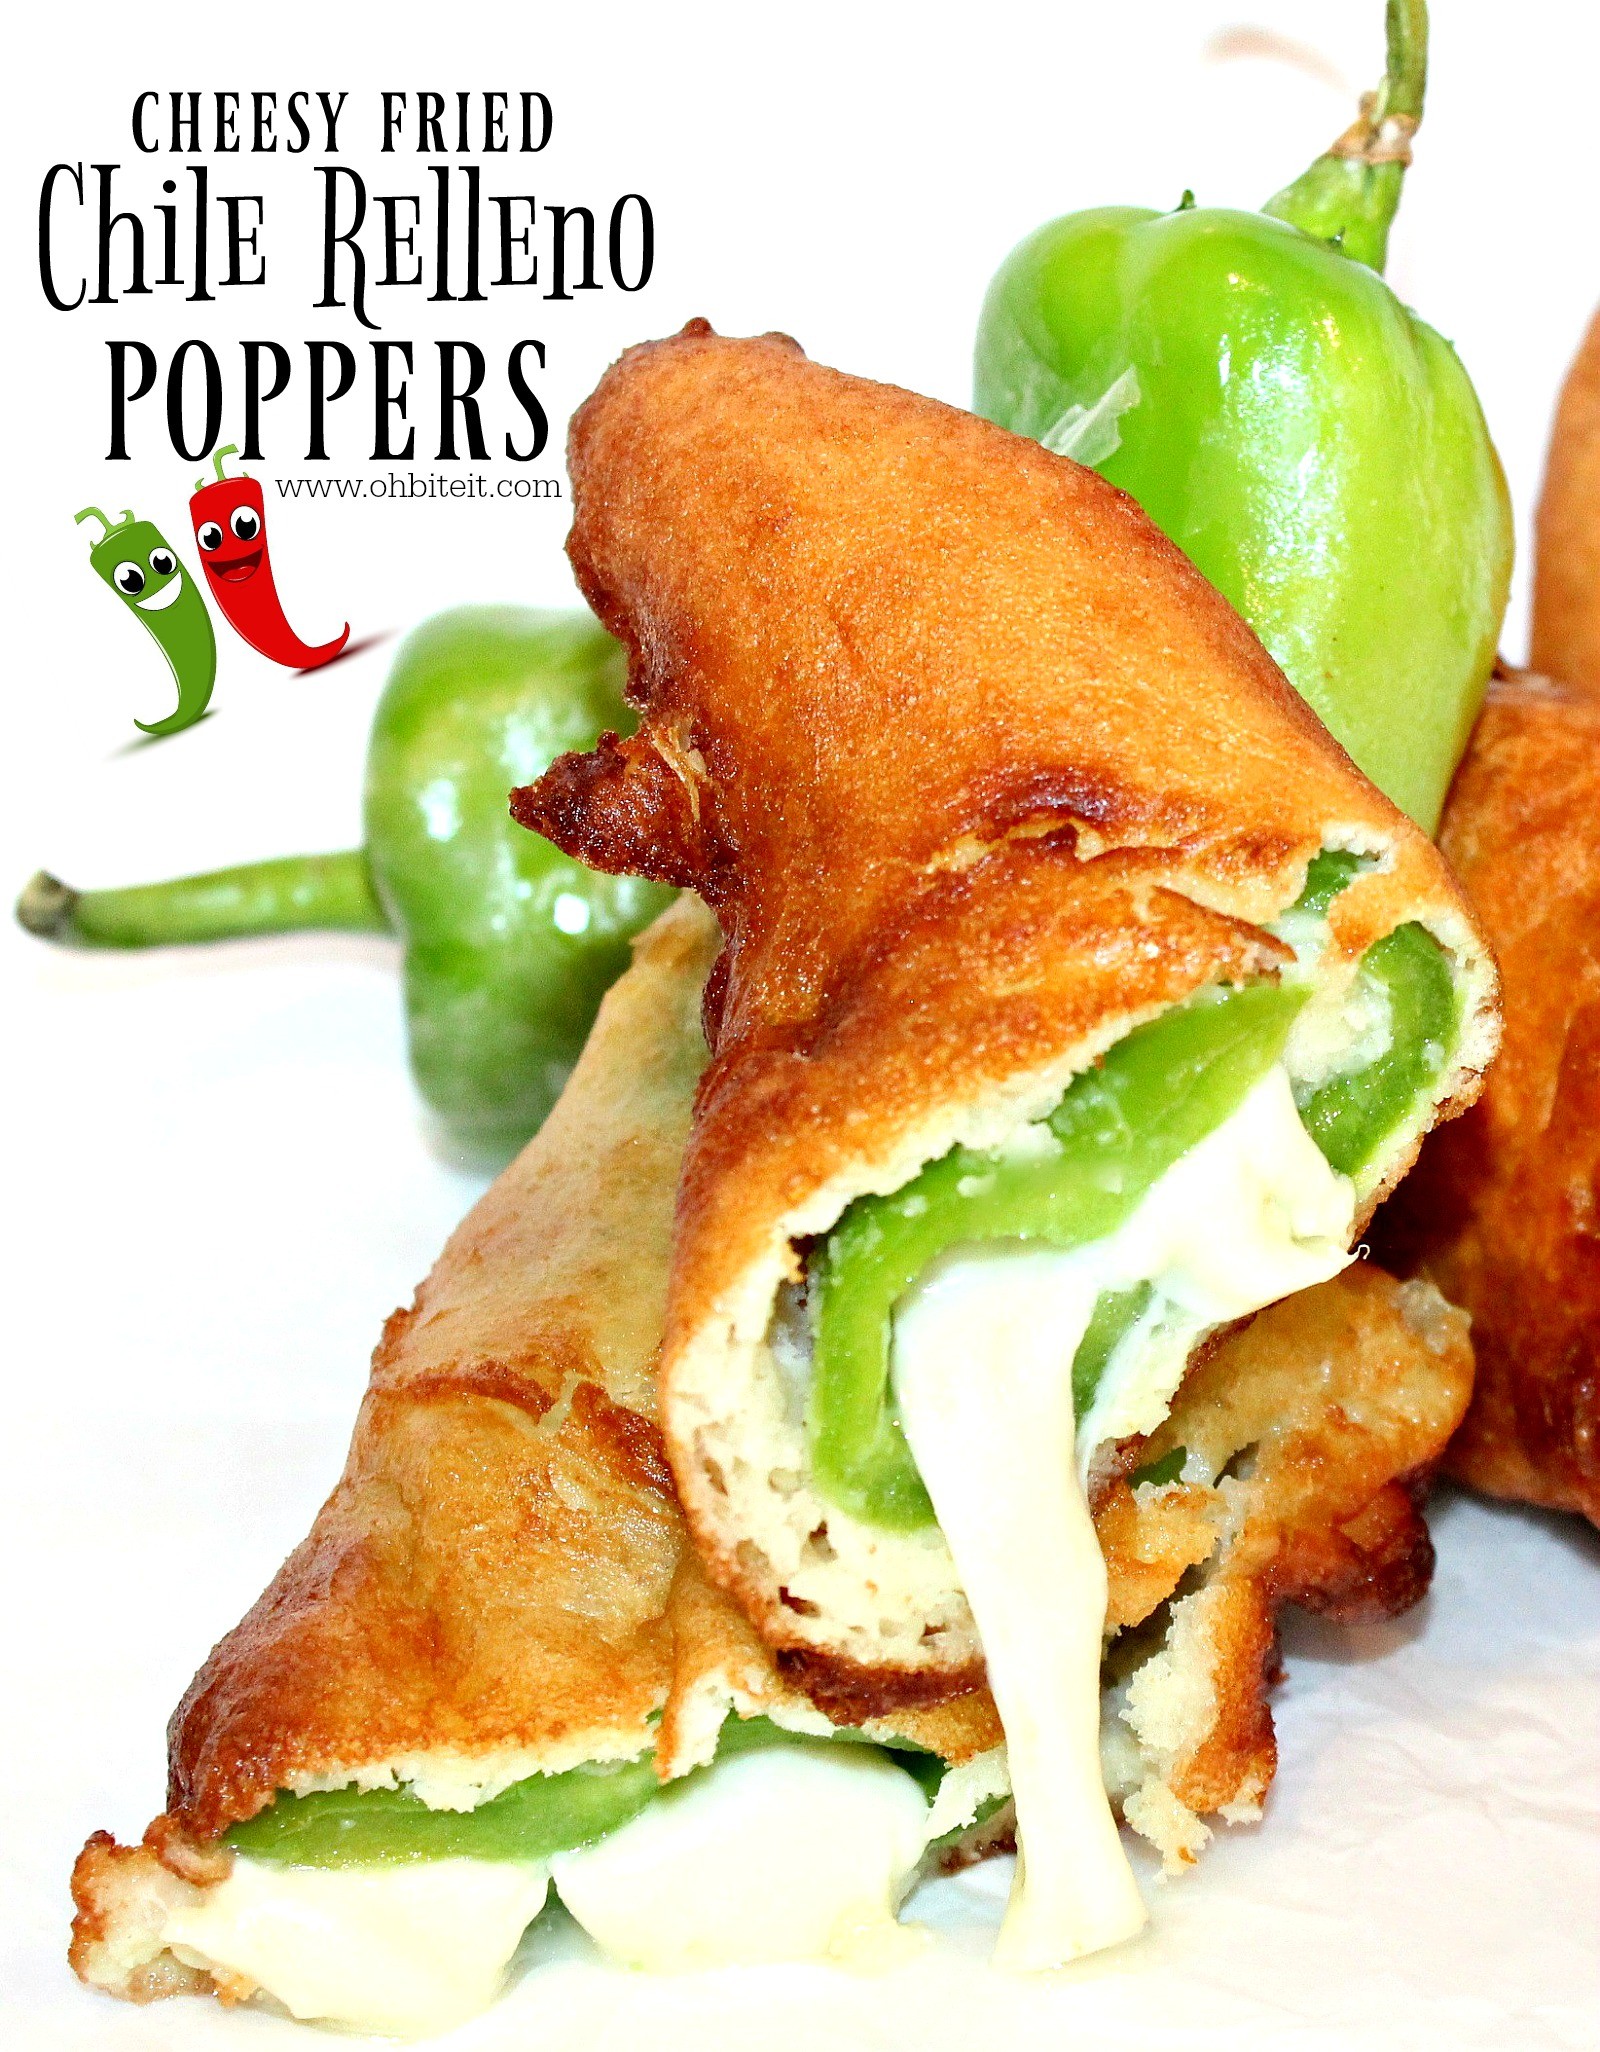 ~Cheesy Fried Chile Relleno Poppers!